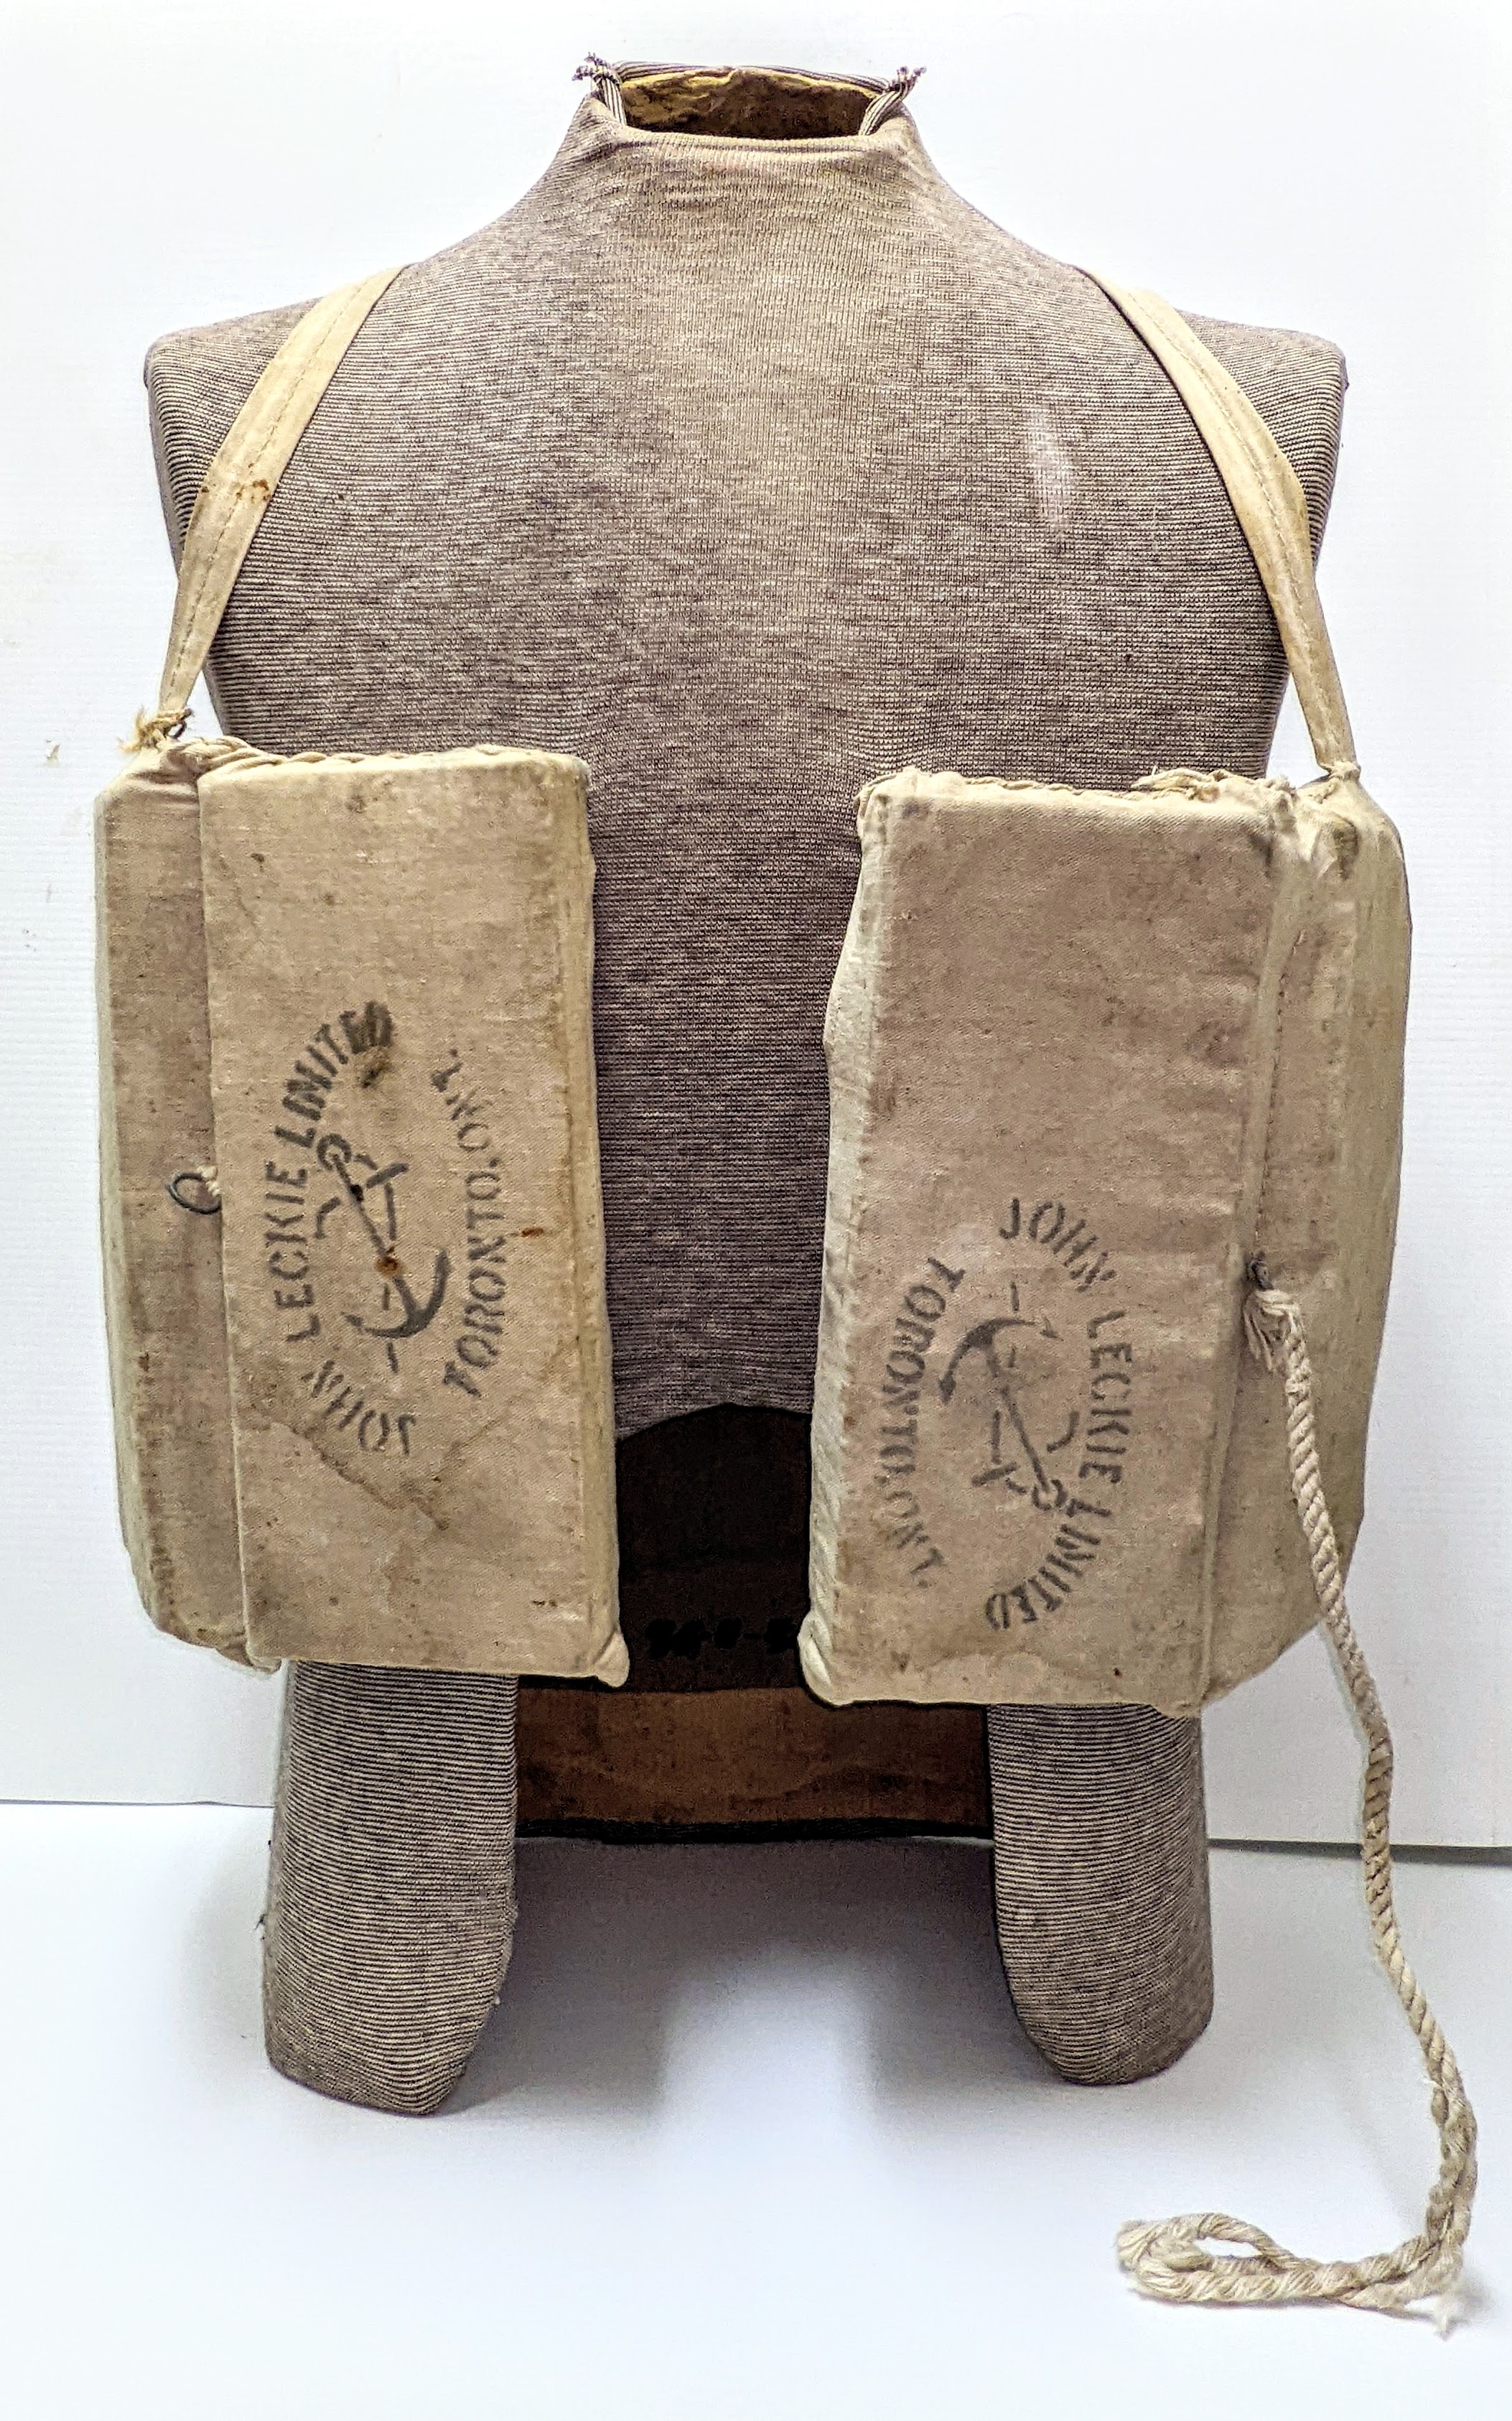 This bulky looking attire is a canvas and cork lifejacket. Made at the turn of the 20th century, this flotation device was used on the SS Peace River which was built in Fort Vermilion in 1905. The boat was operated by the Hudson's Bay company from 1905 - 1916 when it was dry docked and dismantled in Fort Vermilion. The two stamps on the front label the life jacket as a product of John Leckie LTD Toronto - a company specializing in fishing supplies! On the back side is a "Peace River" stamp.
2002.247.01 / Fort Vermilion Historical Society